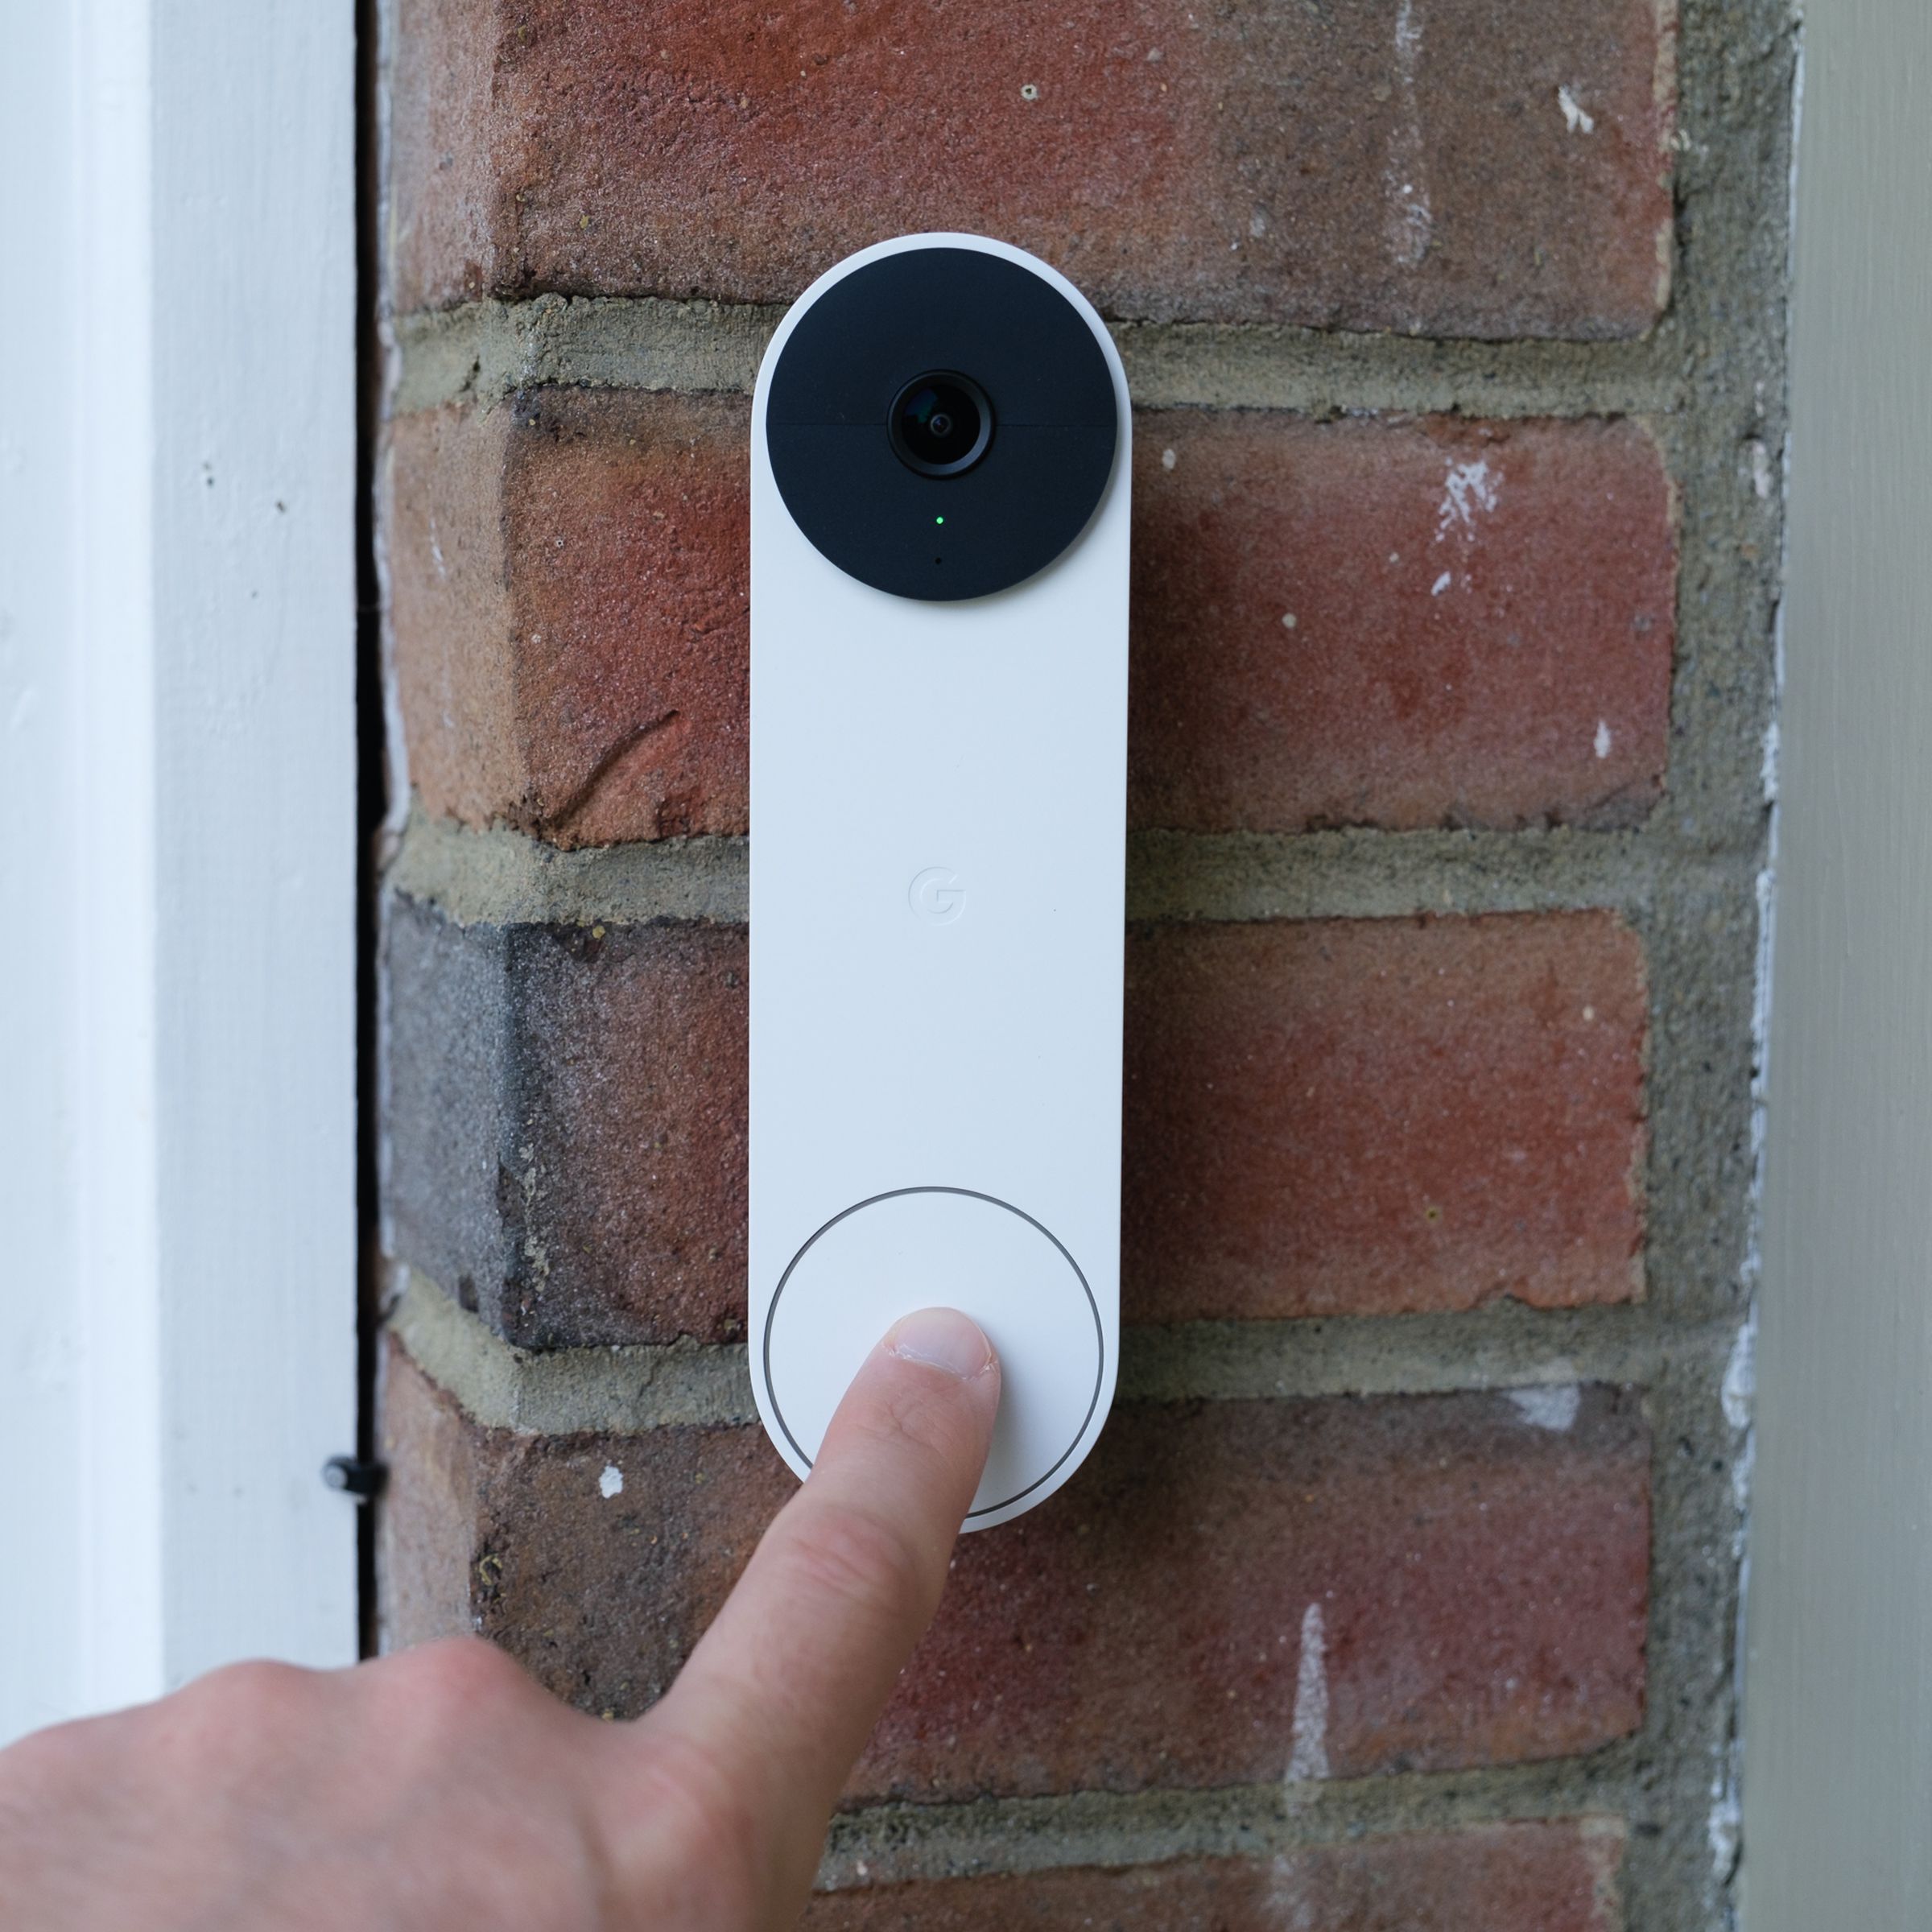 You can soon set your Nest doorbell to cackle at your visitors.